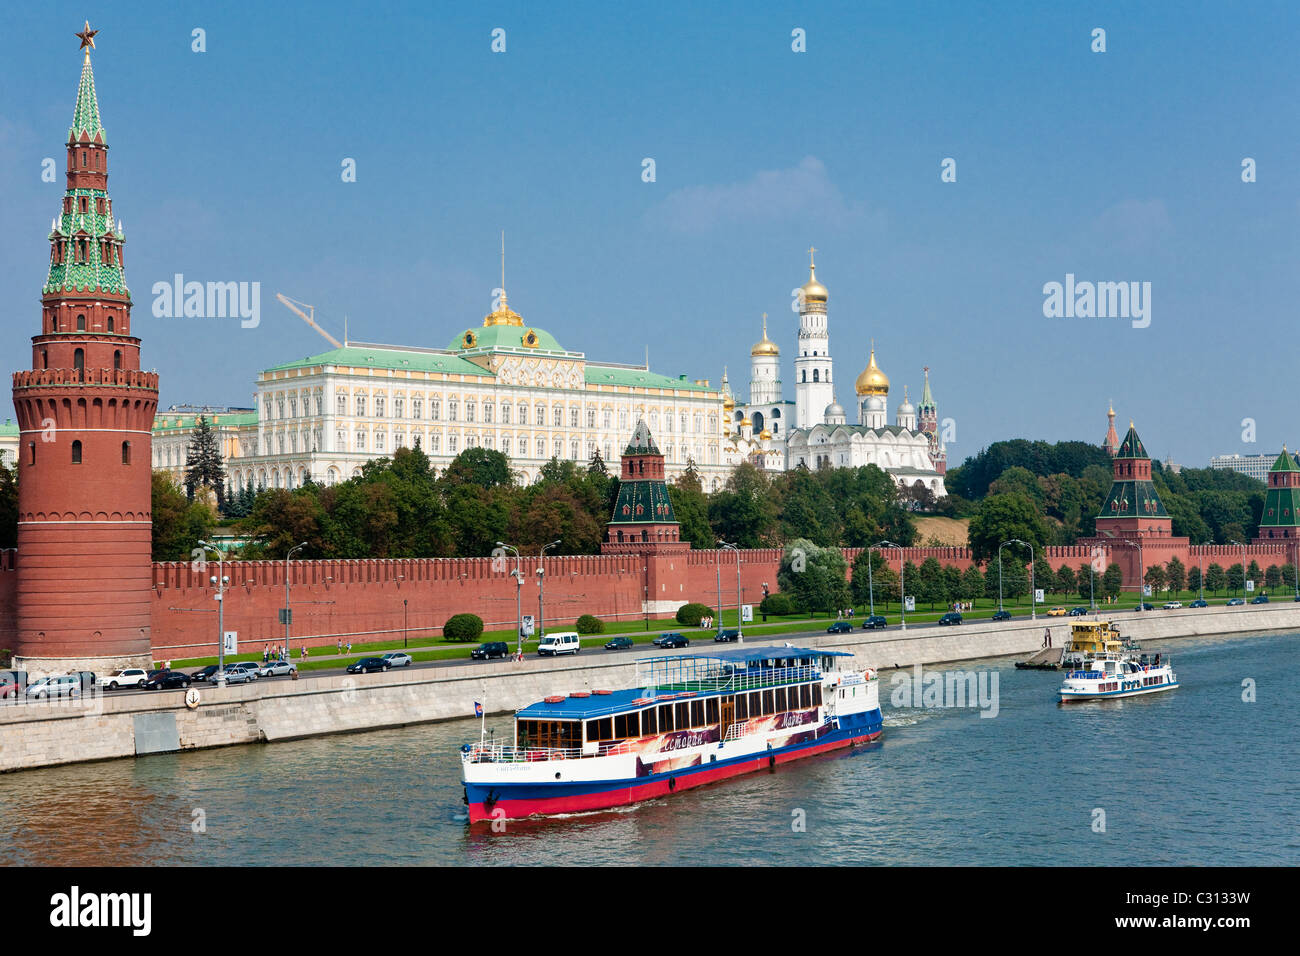 Grand Kremlin Palace and the Church of the Deposition of the Robe, Moscow Kremlin, Russian Federation Stock Photo